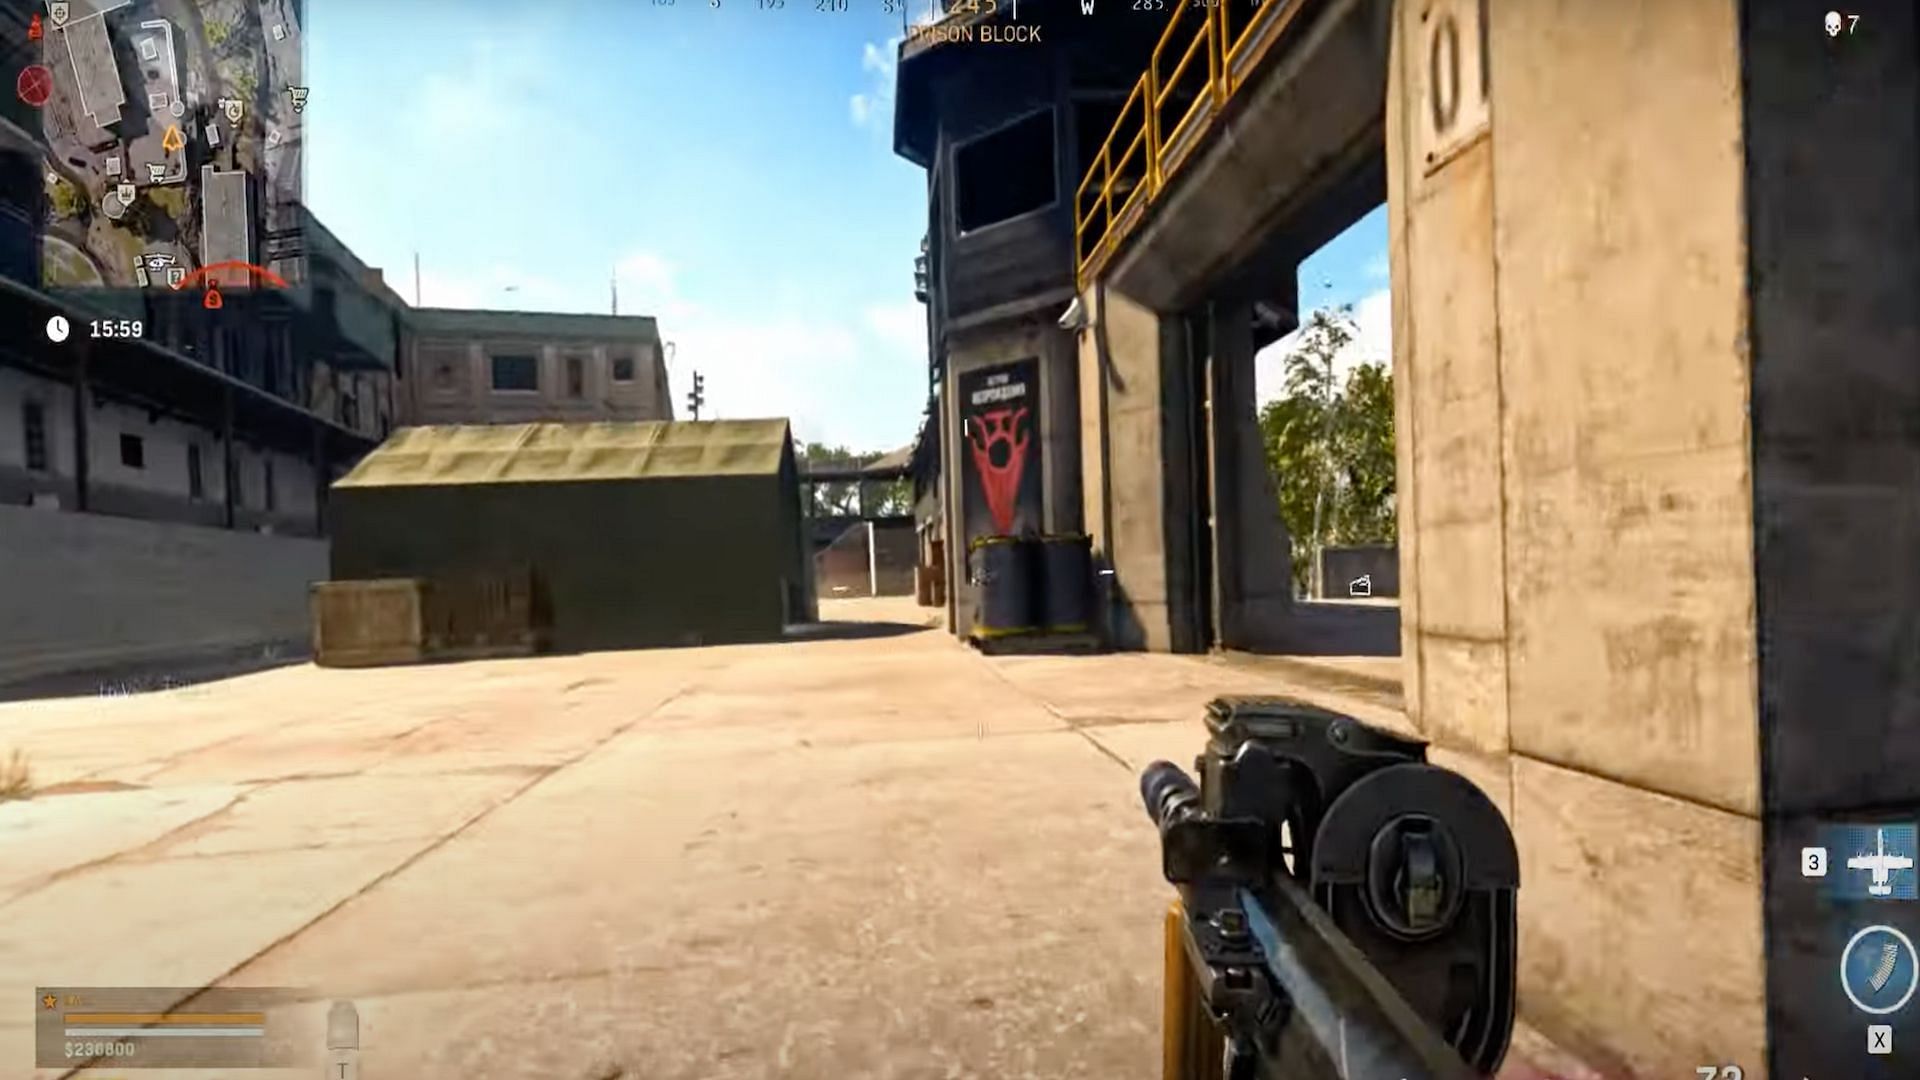 Players of Call of Duty: Warzone can use some powerful weapons (Image via NoAwkwardCommentary/YouTube)